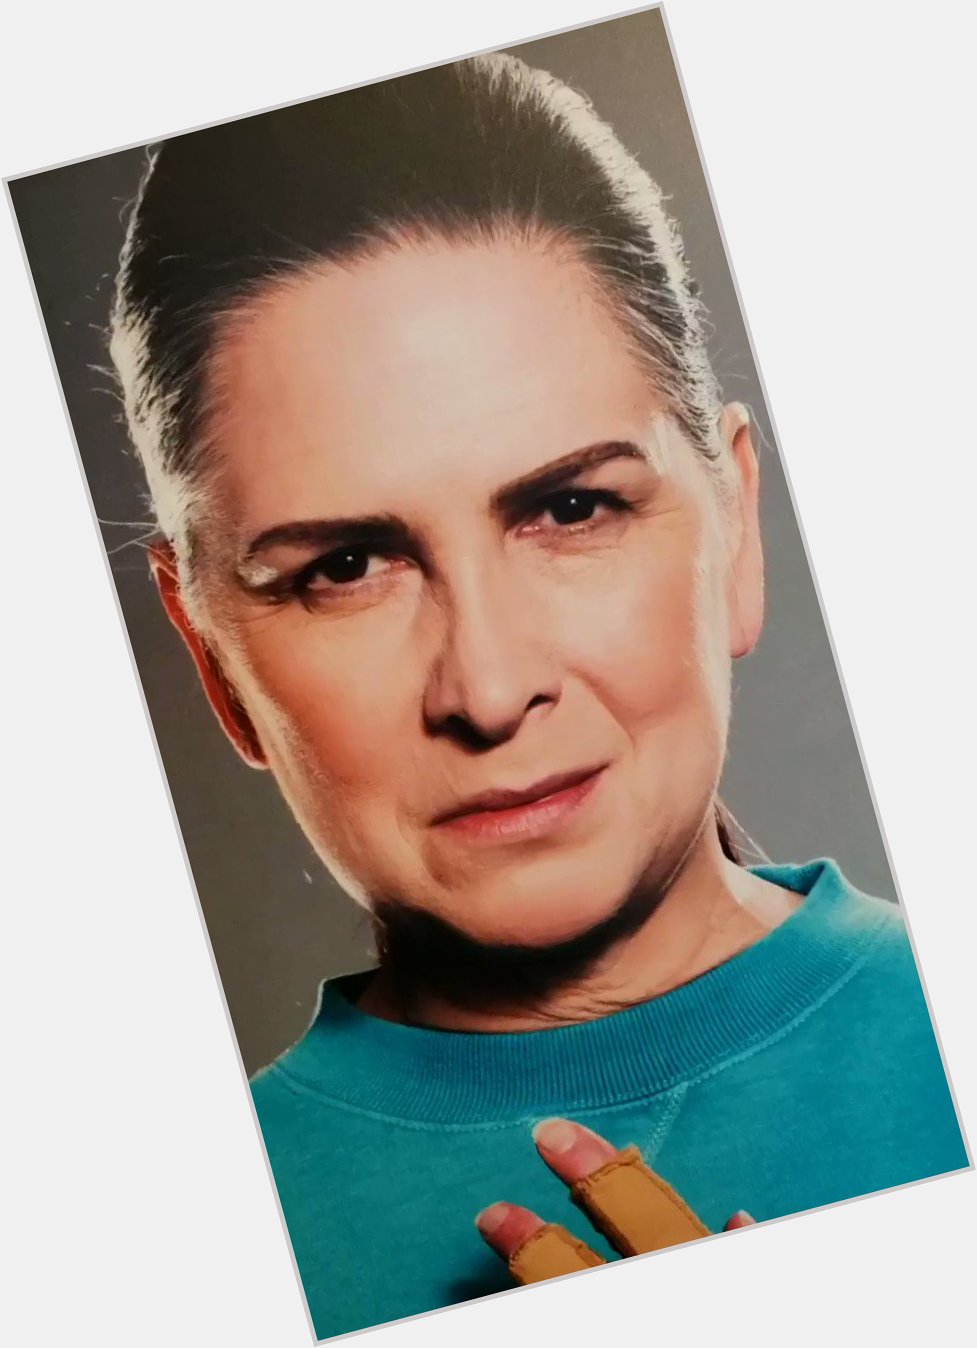 This beautiful banner was delivered on the perfect day. Happy Birthday (in the States) Pamela Rabe! 